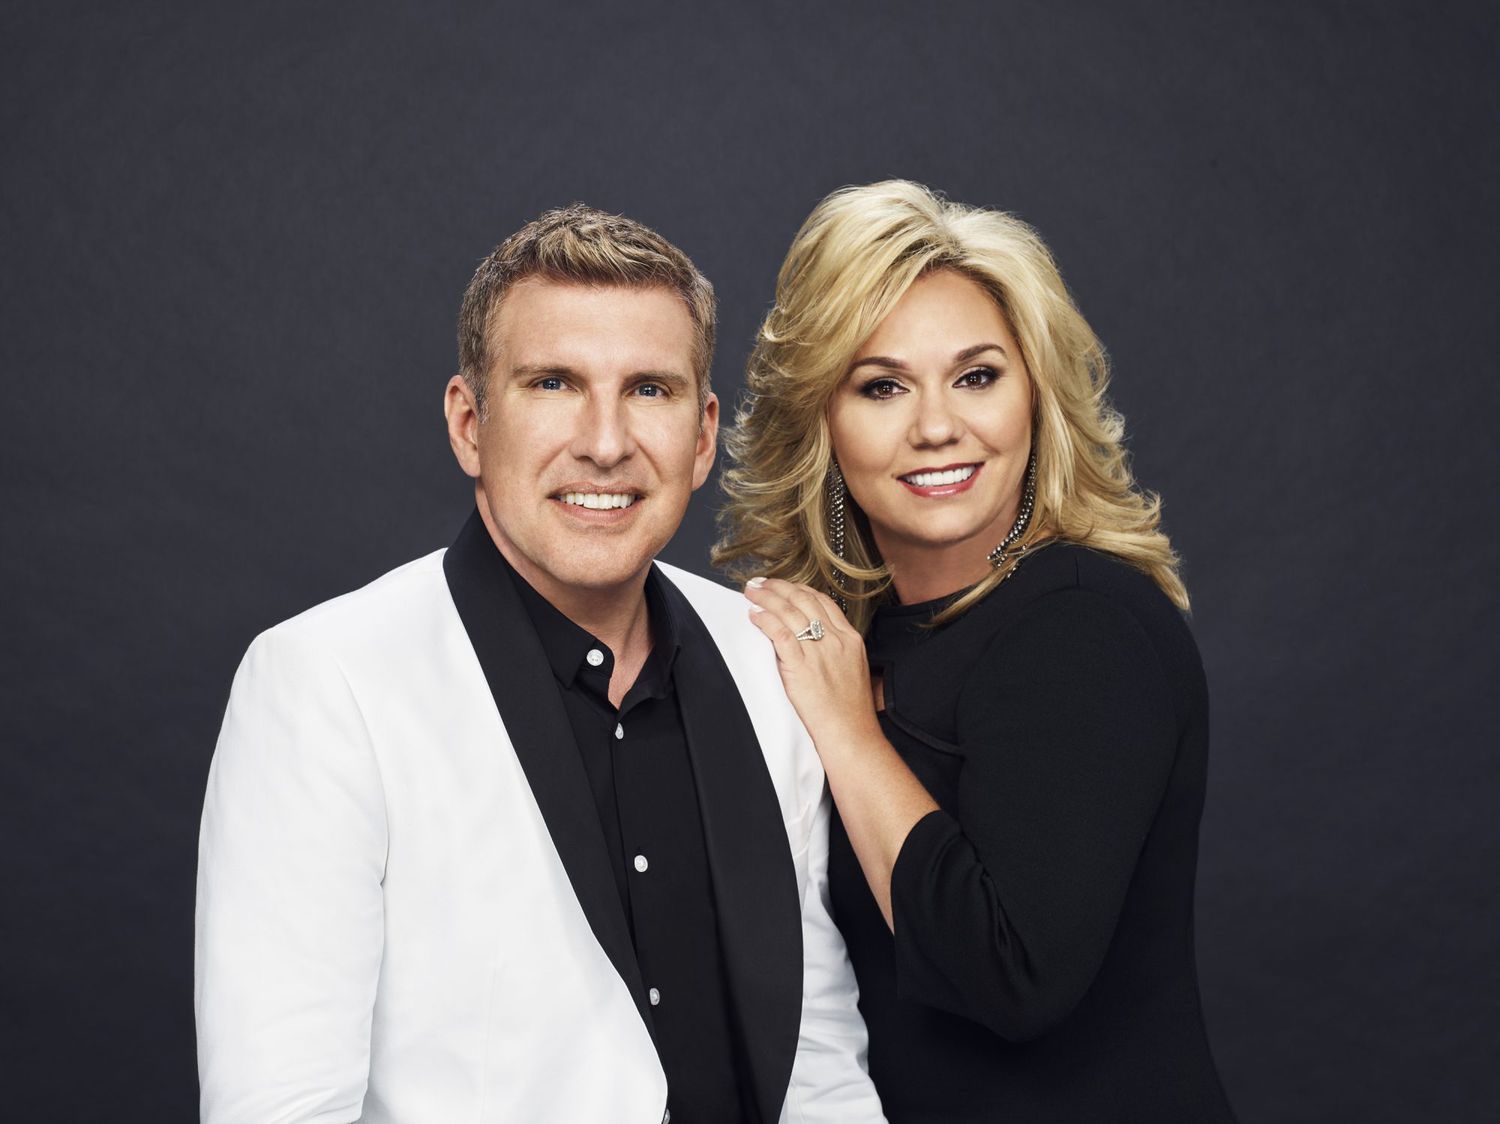 Todd Chrisley is not dead